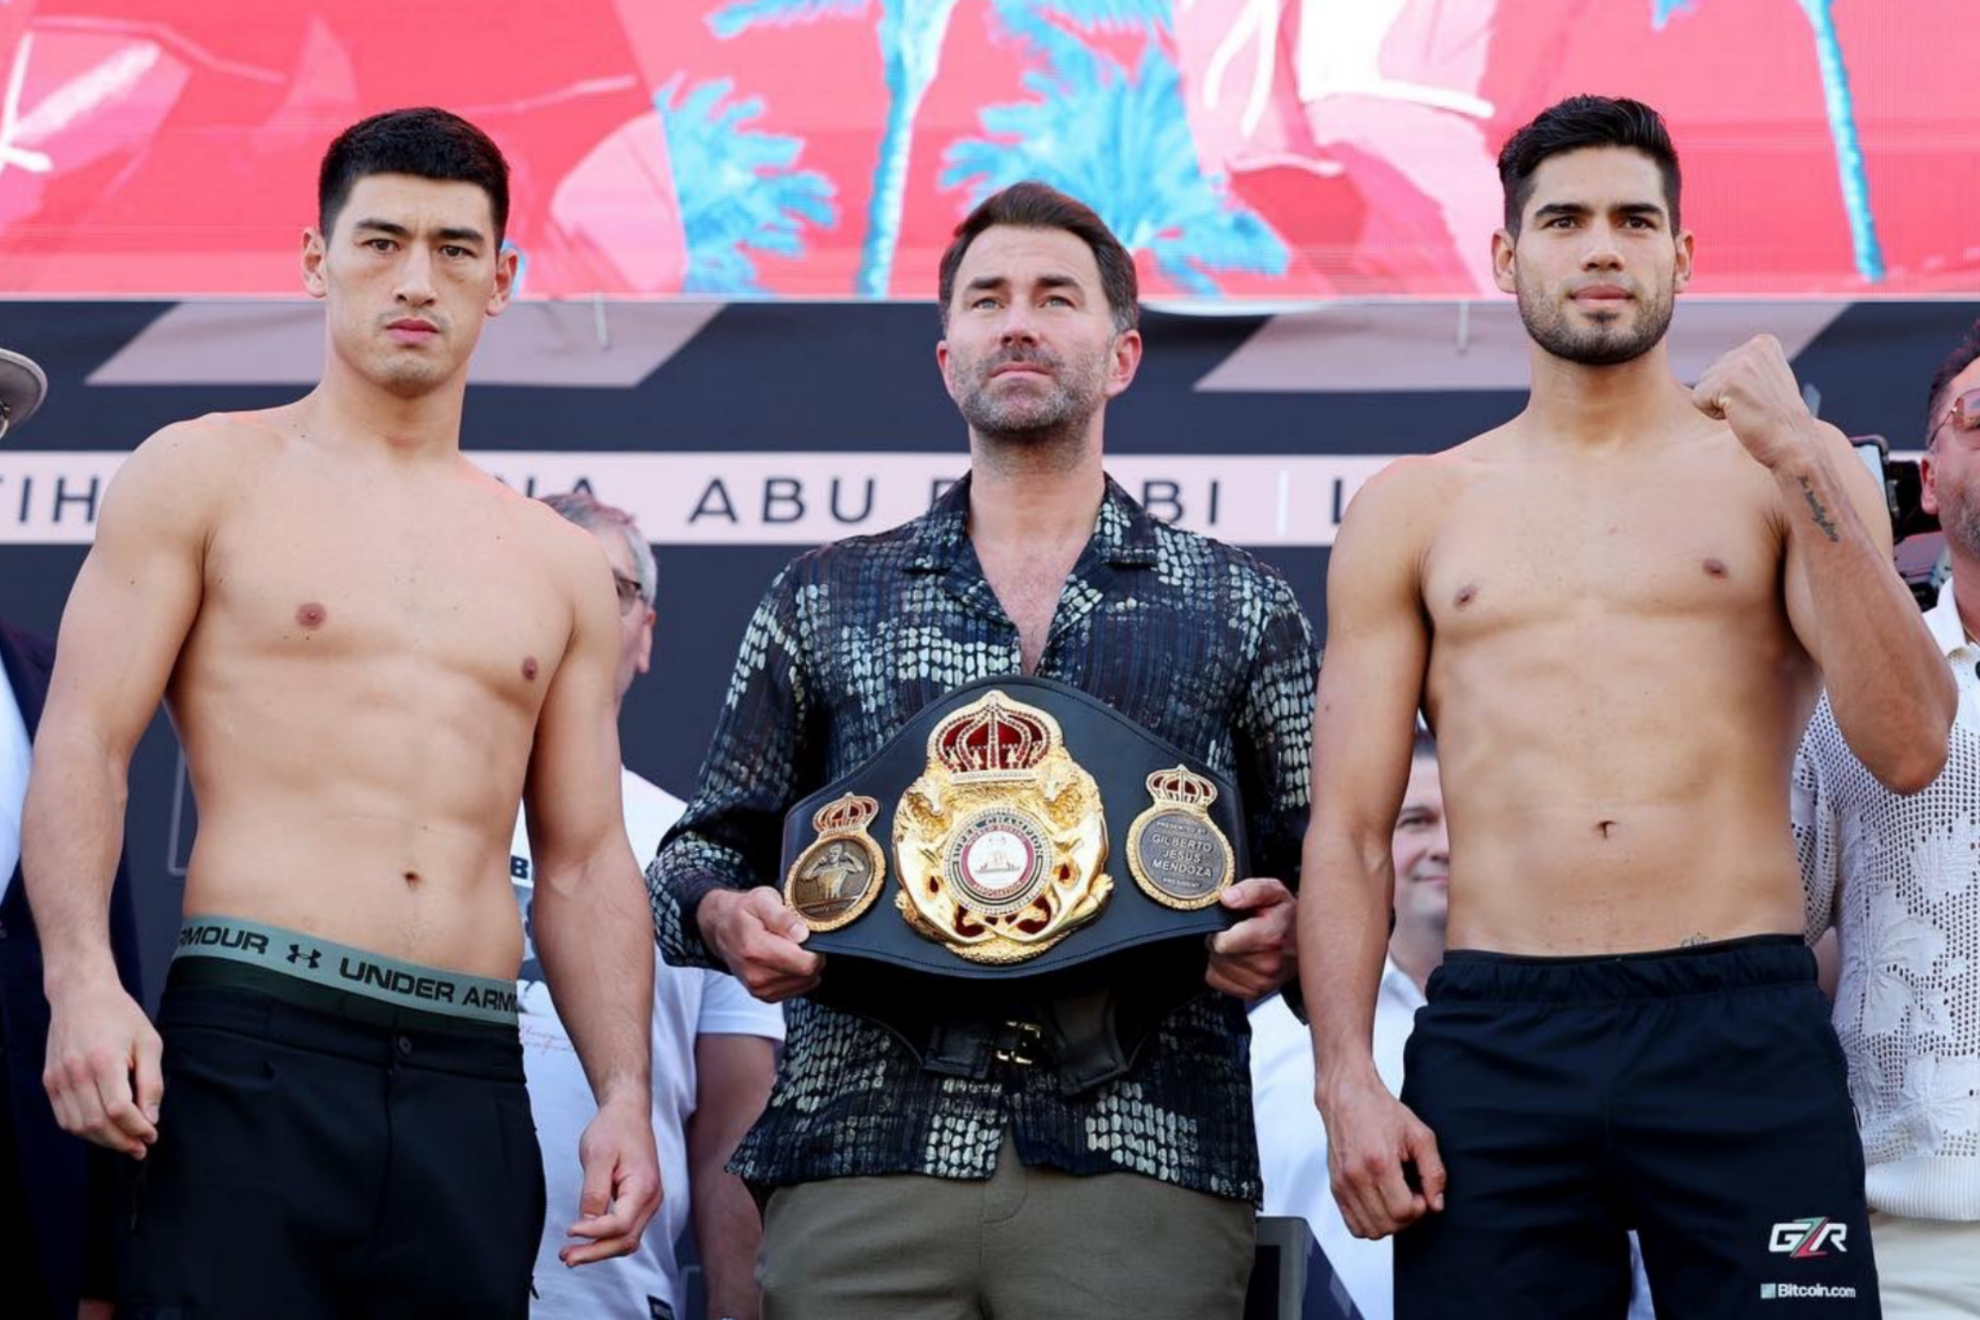 Dmitry Bivol and Gilberto "Zurdo" Ramirez weighed in for their fight in Abu Dhabi.